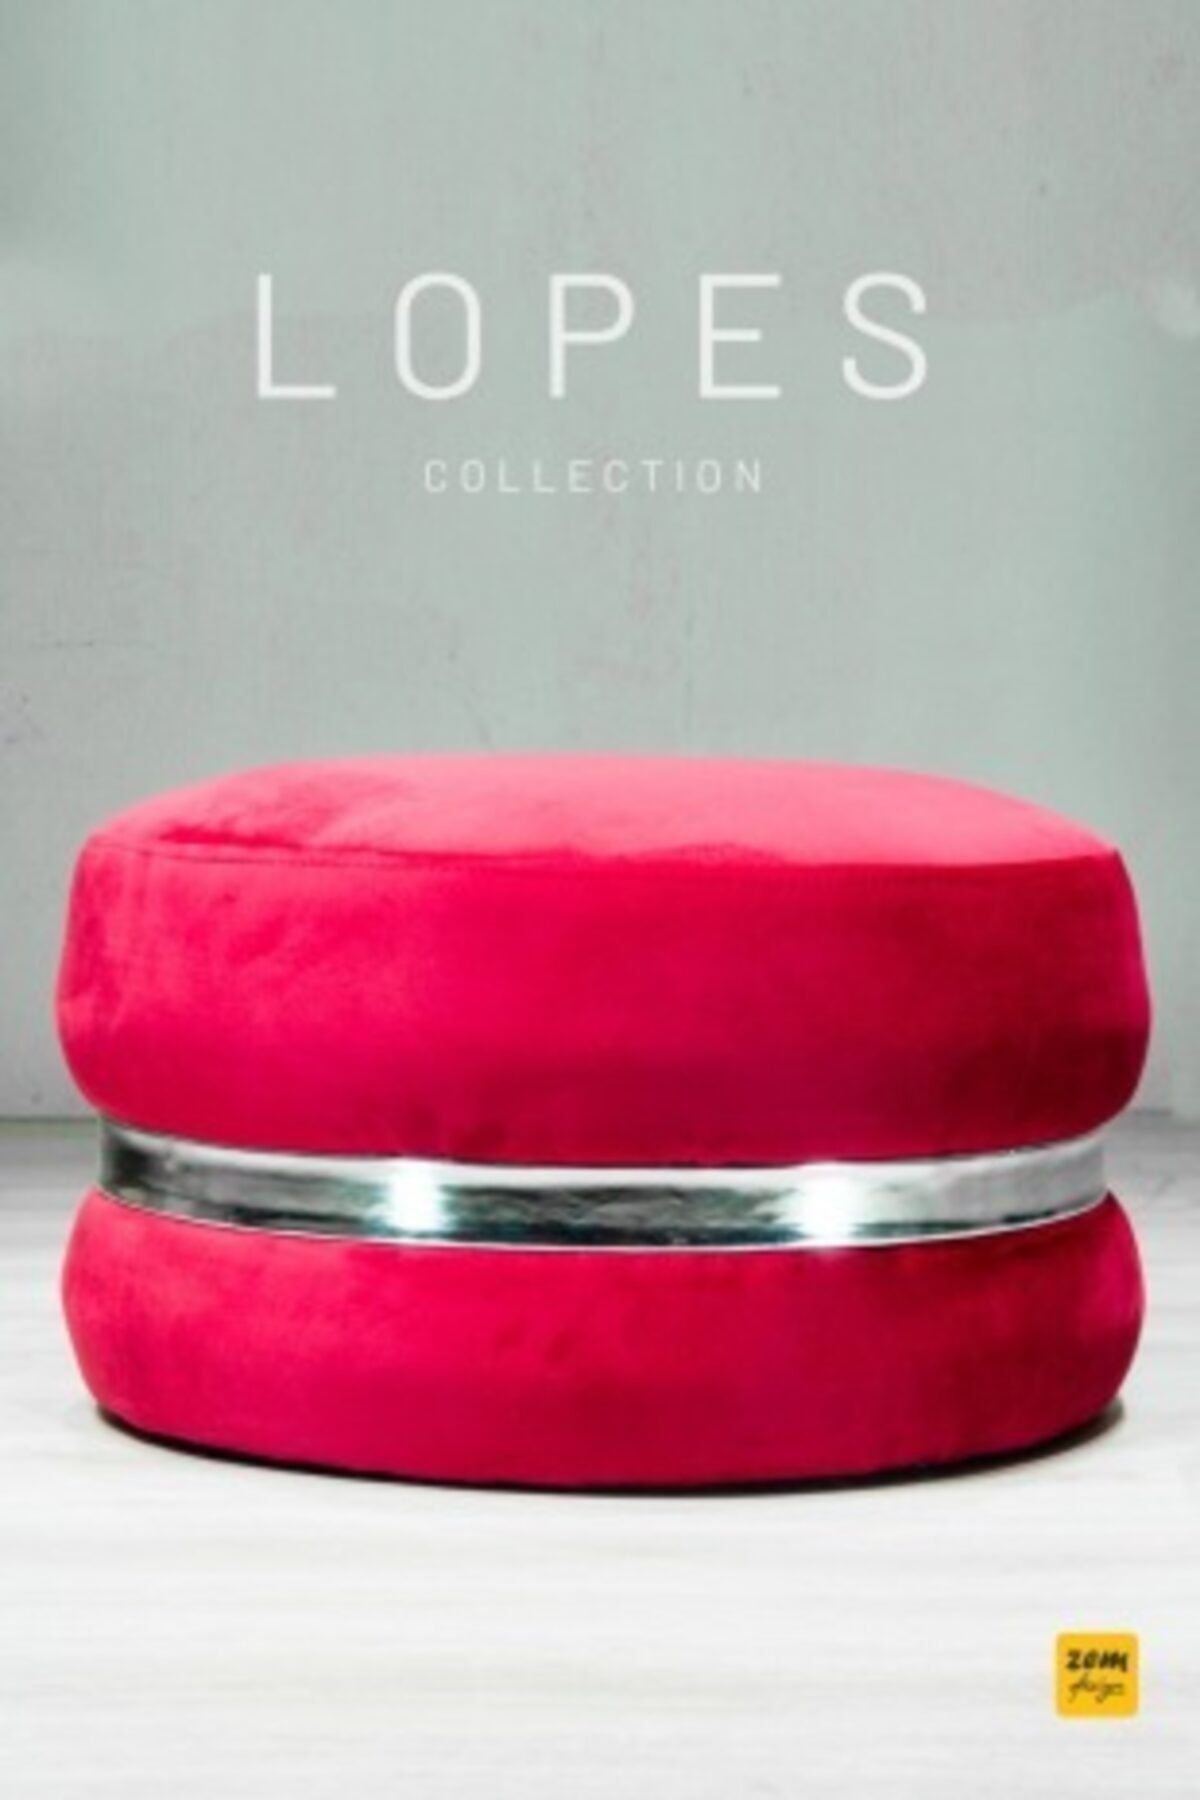 Zem Lopes Red Silver Puf